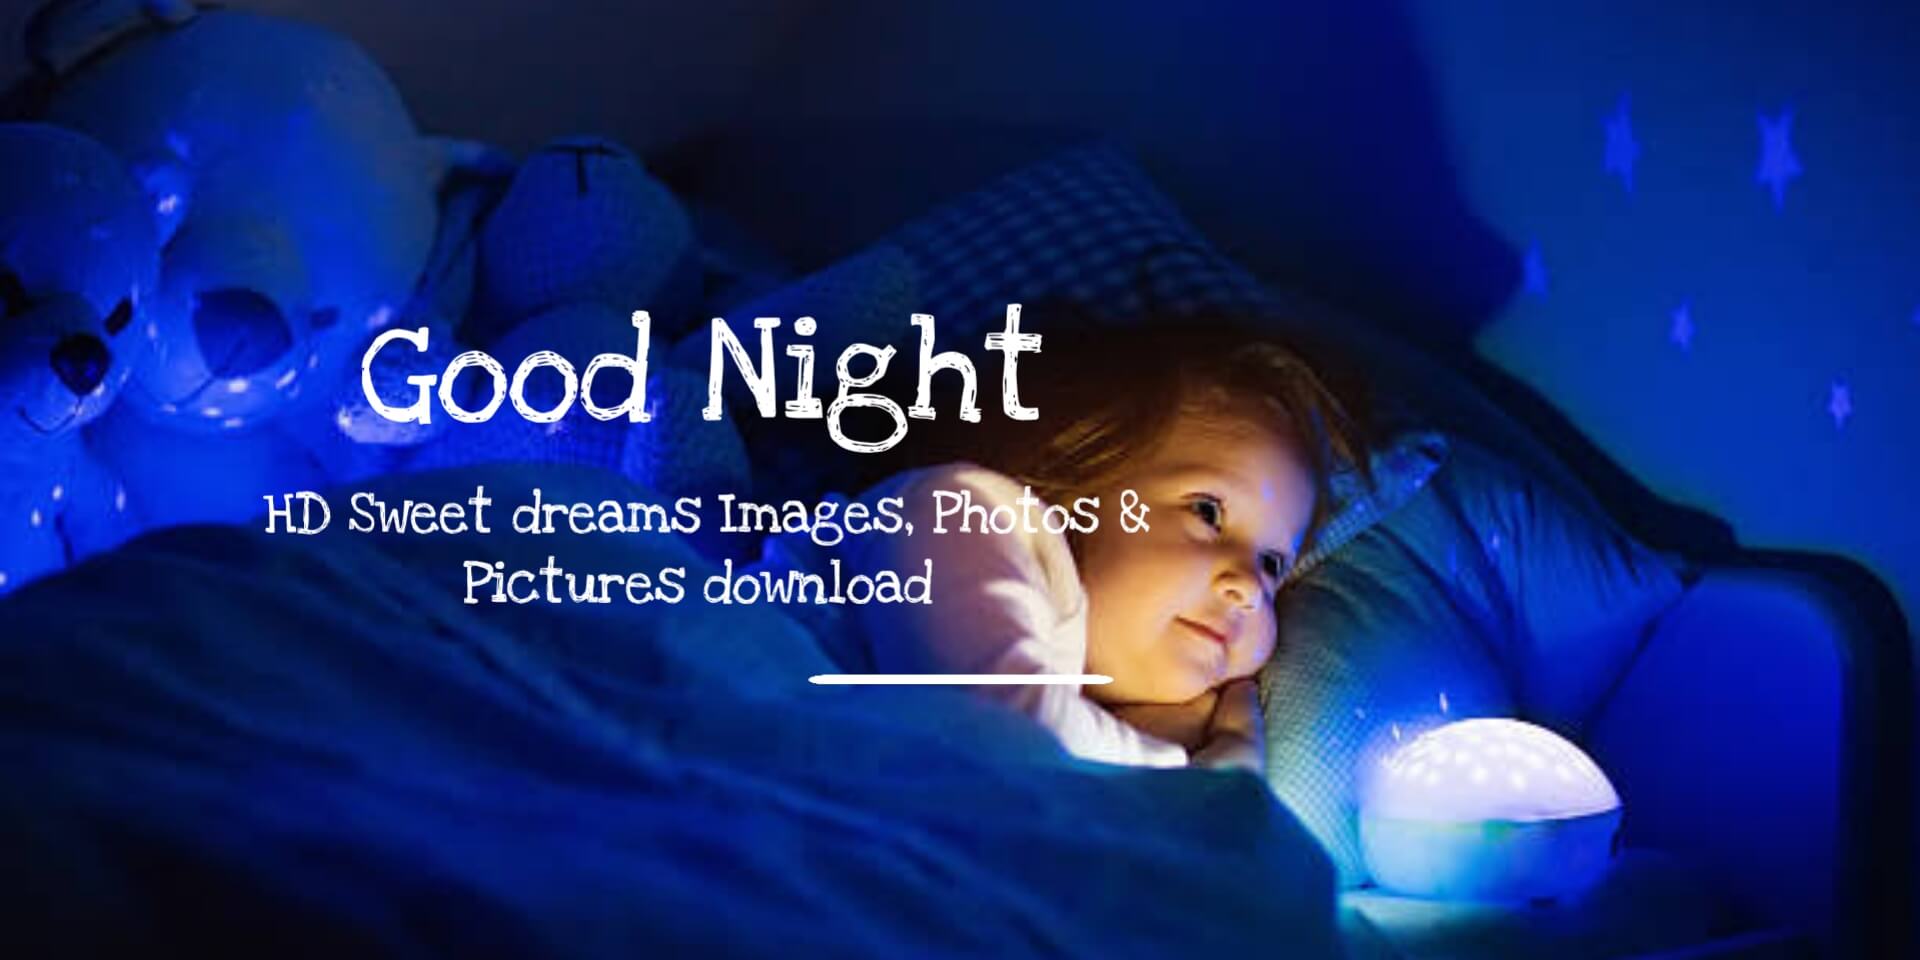 The Ultimate Collection of Top 999+ High-Quality Good Night Images in Stunning Full 4K